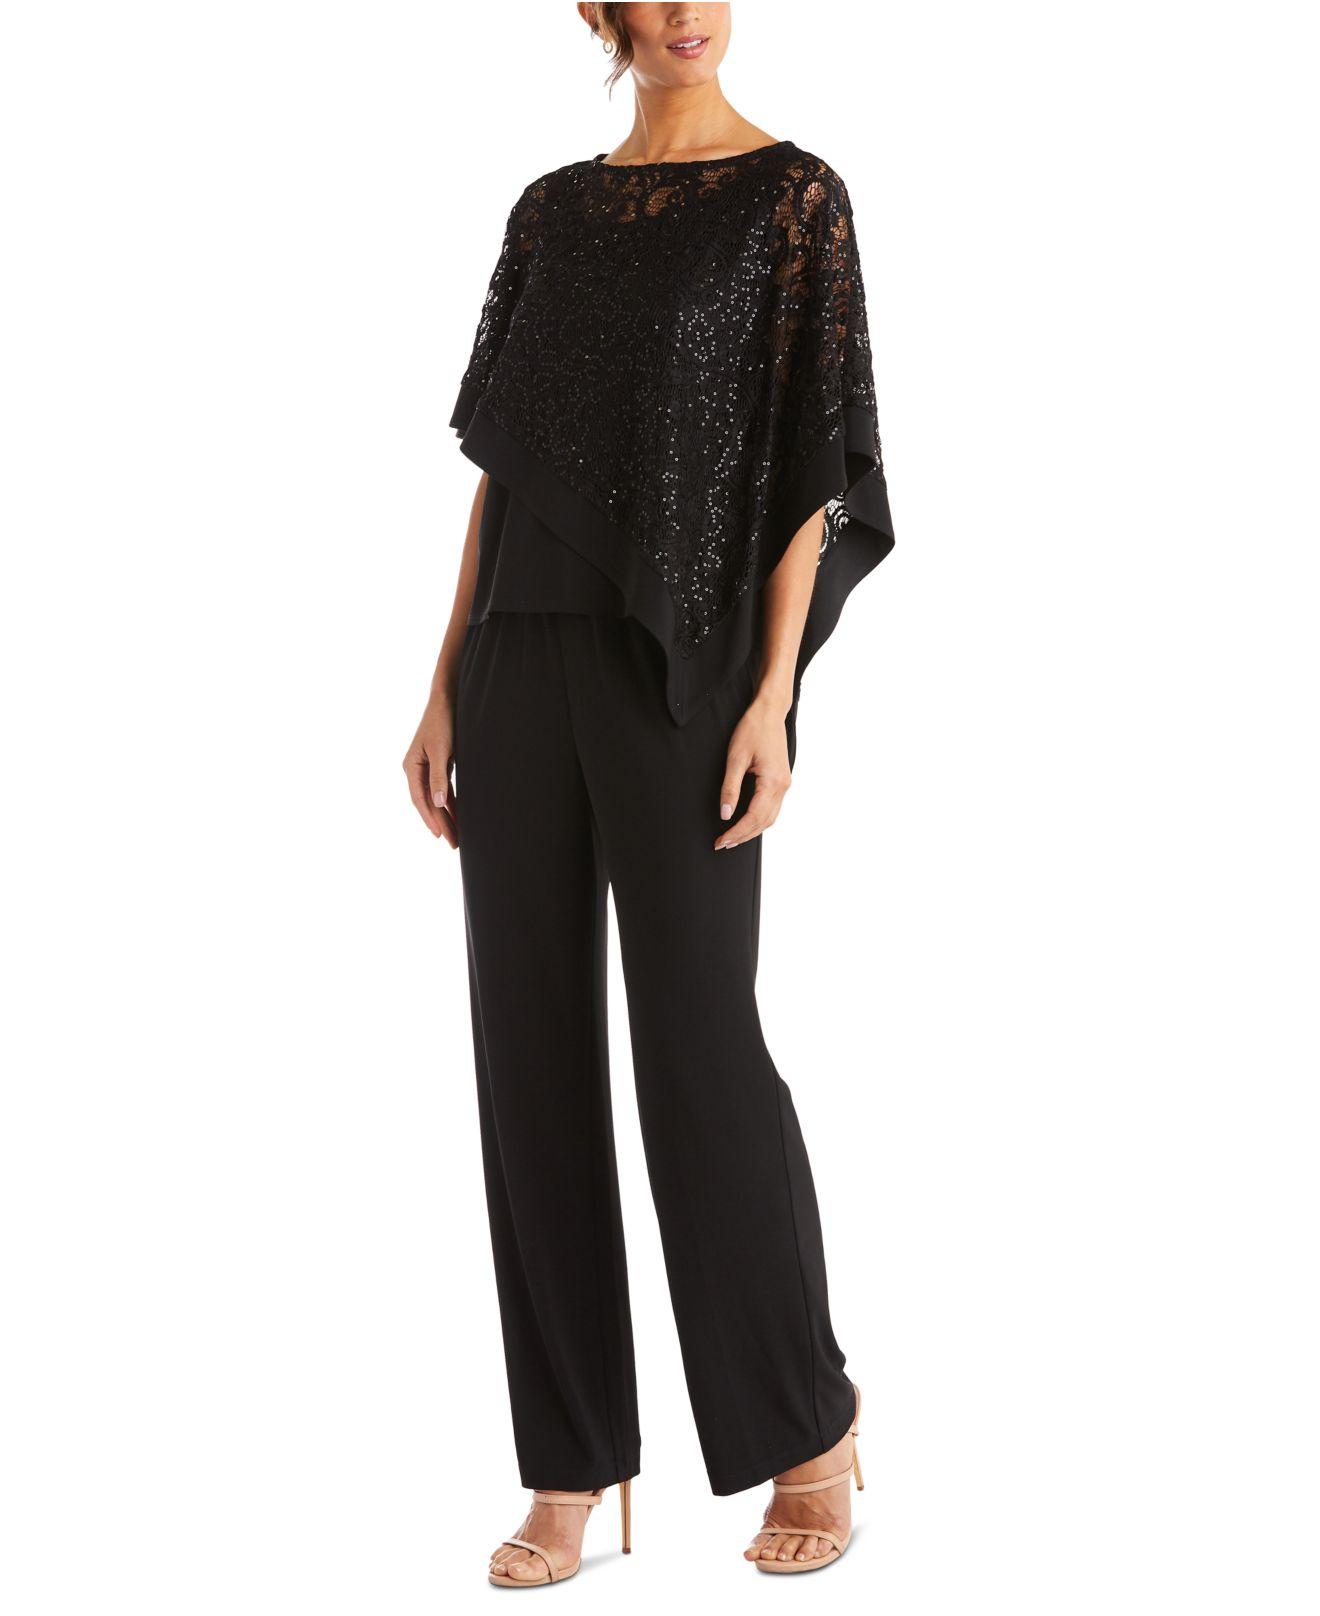 R & M Richards Synthetic 2-pc. Sequinned Poncho & Pants Set in Black - Lyst